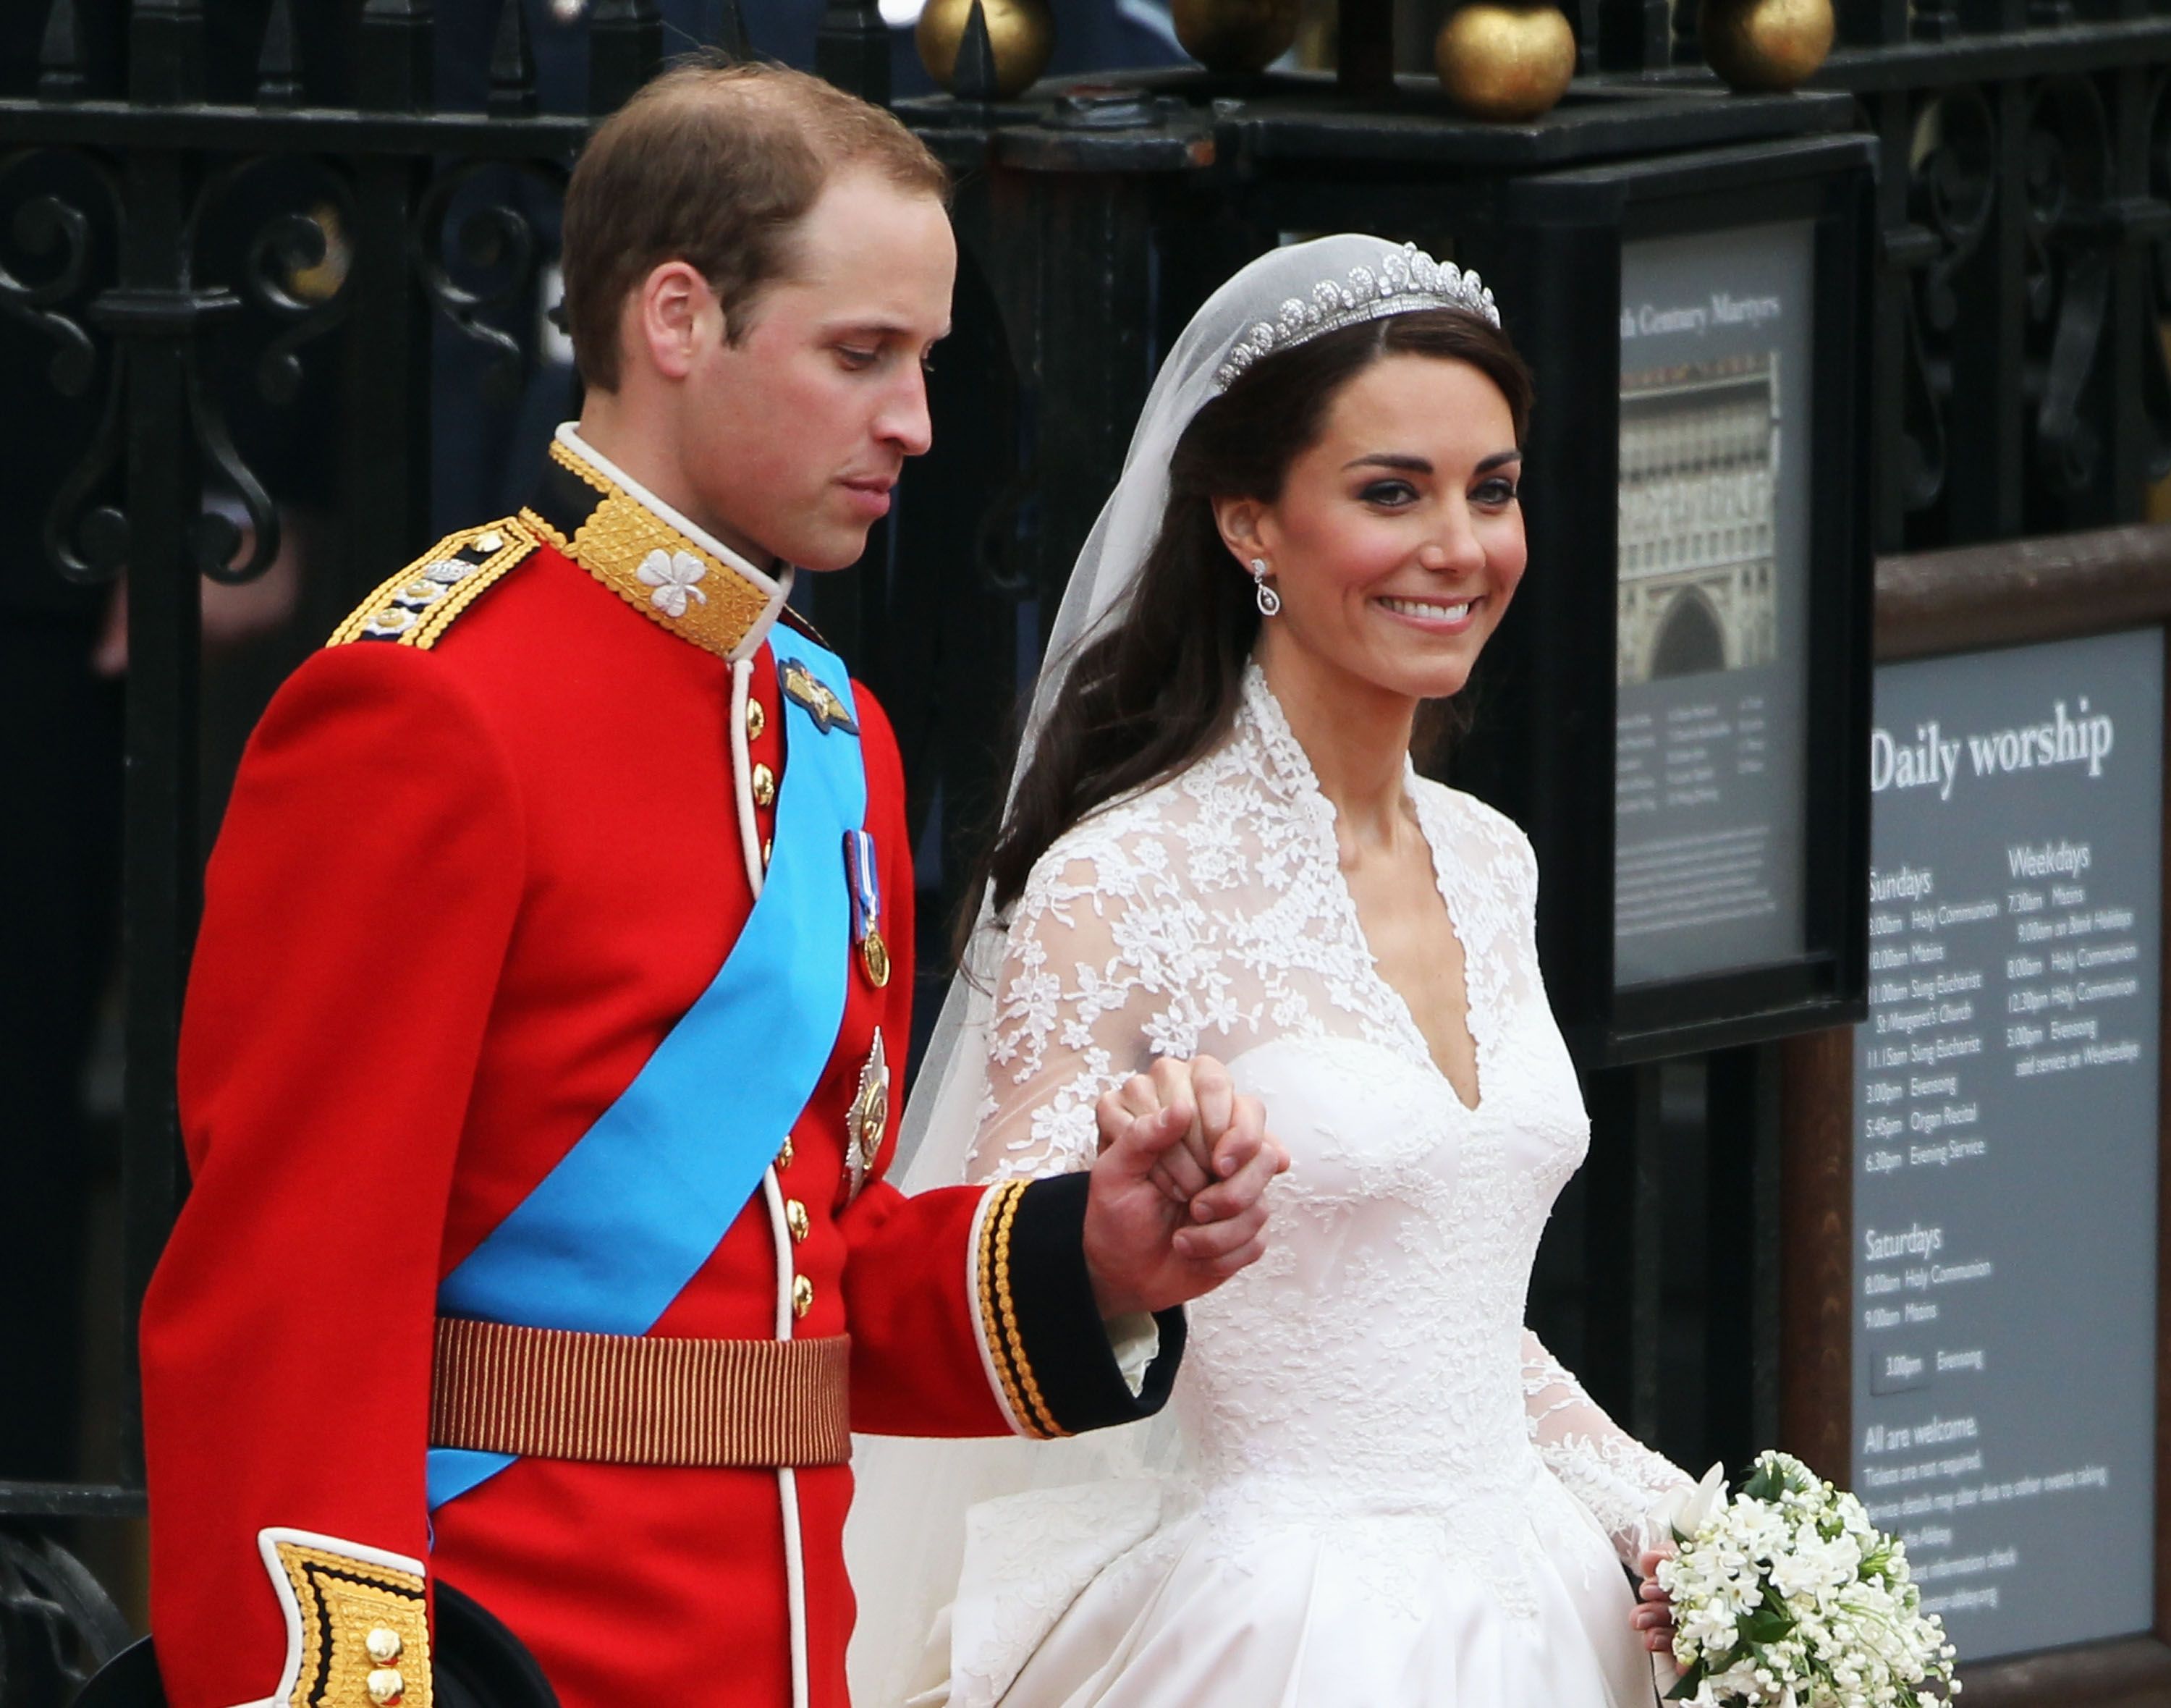 Prince William and Catherine Duchess of Cambridge on their wedding day, April 29, 2011 in London, England | Source: Getty Images